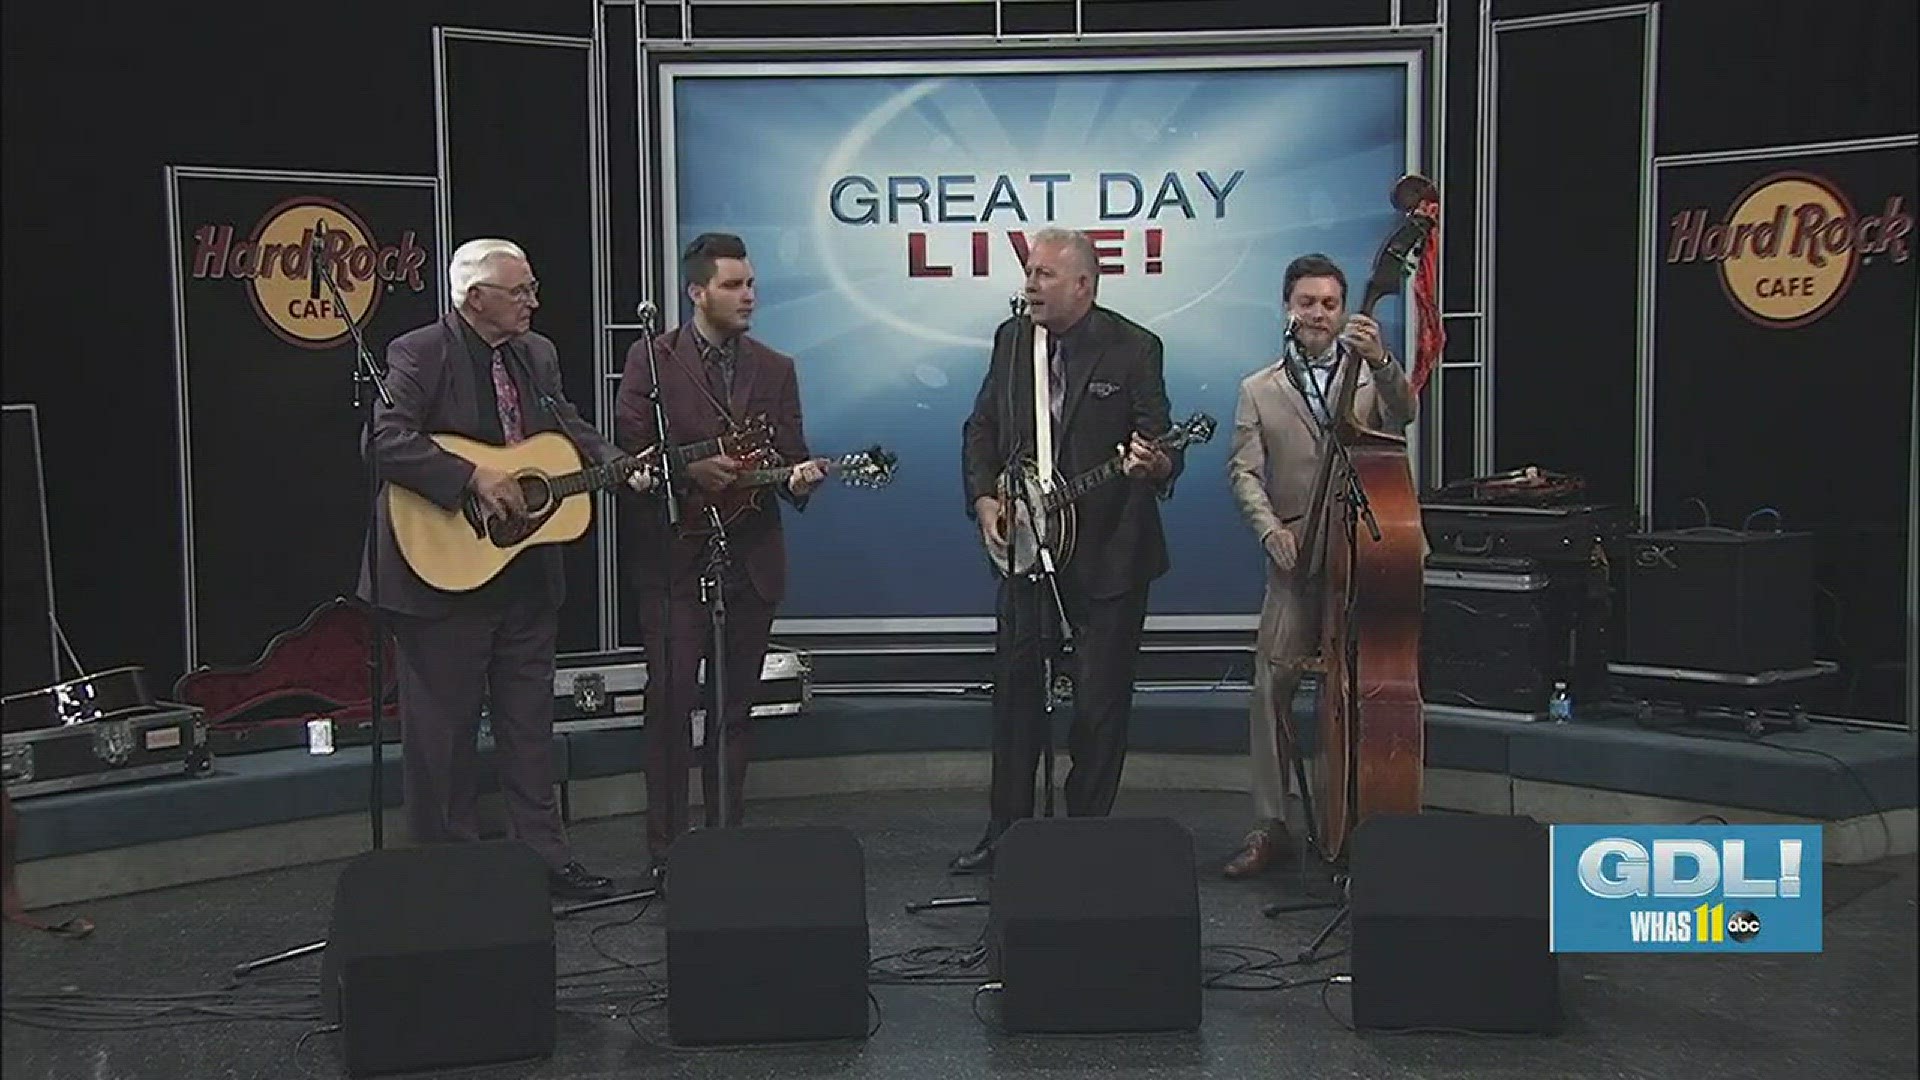 "Brew-grass" is bluegrass music that run through the instruments of Gary Brewer and the Kentucky Ramblers. The local family band is made up of Gary Brewer, his sons Wayne and Mason, his dad Finley, and a banjo and fiddler.